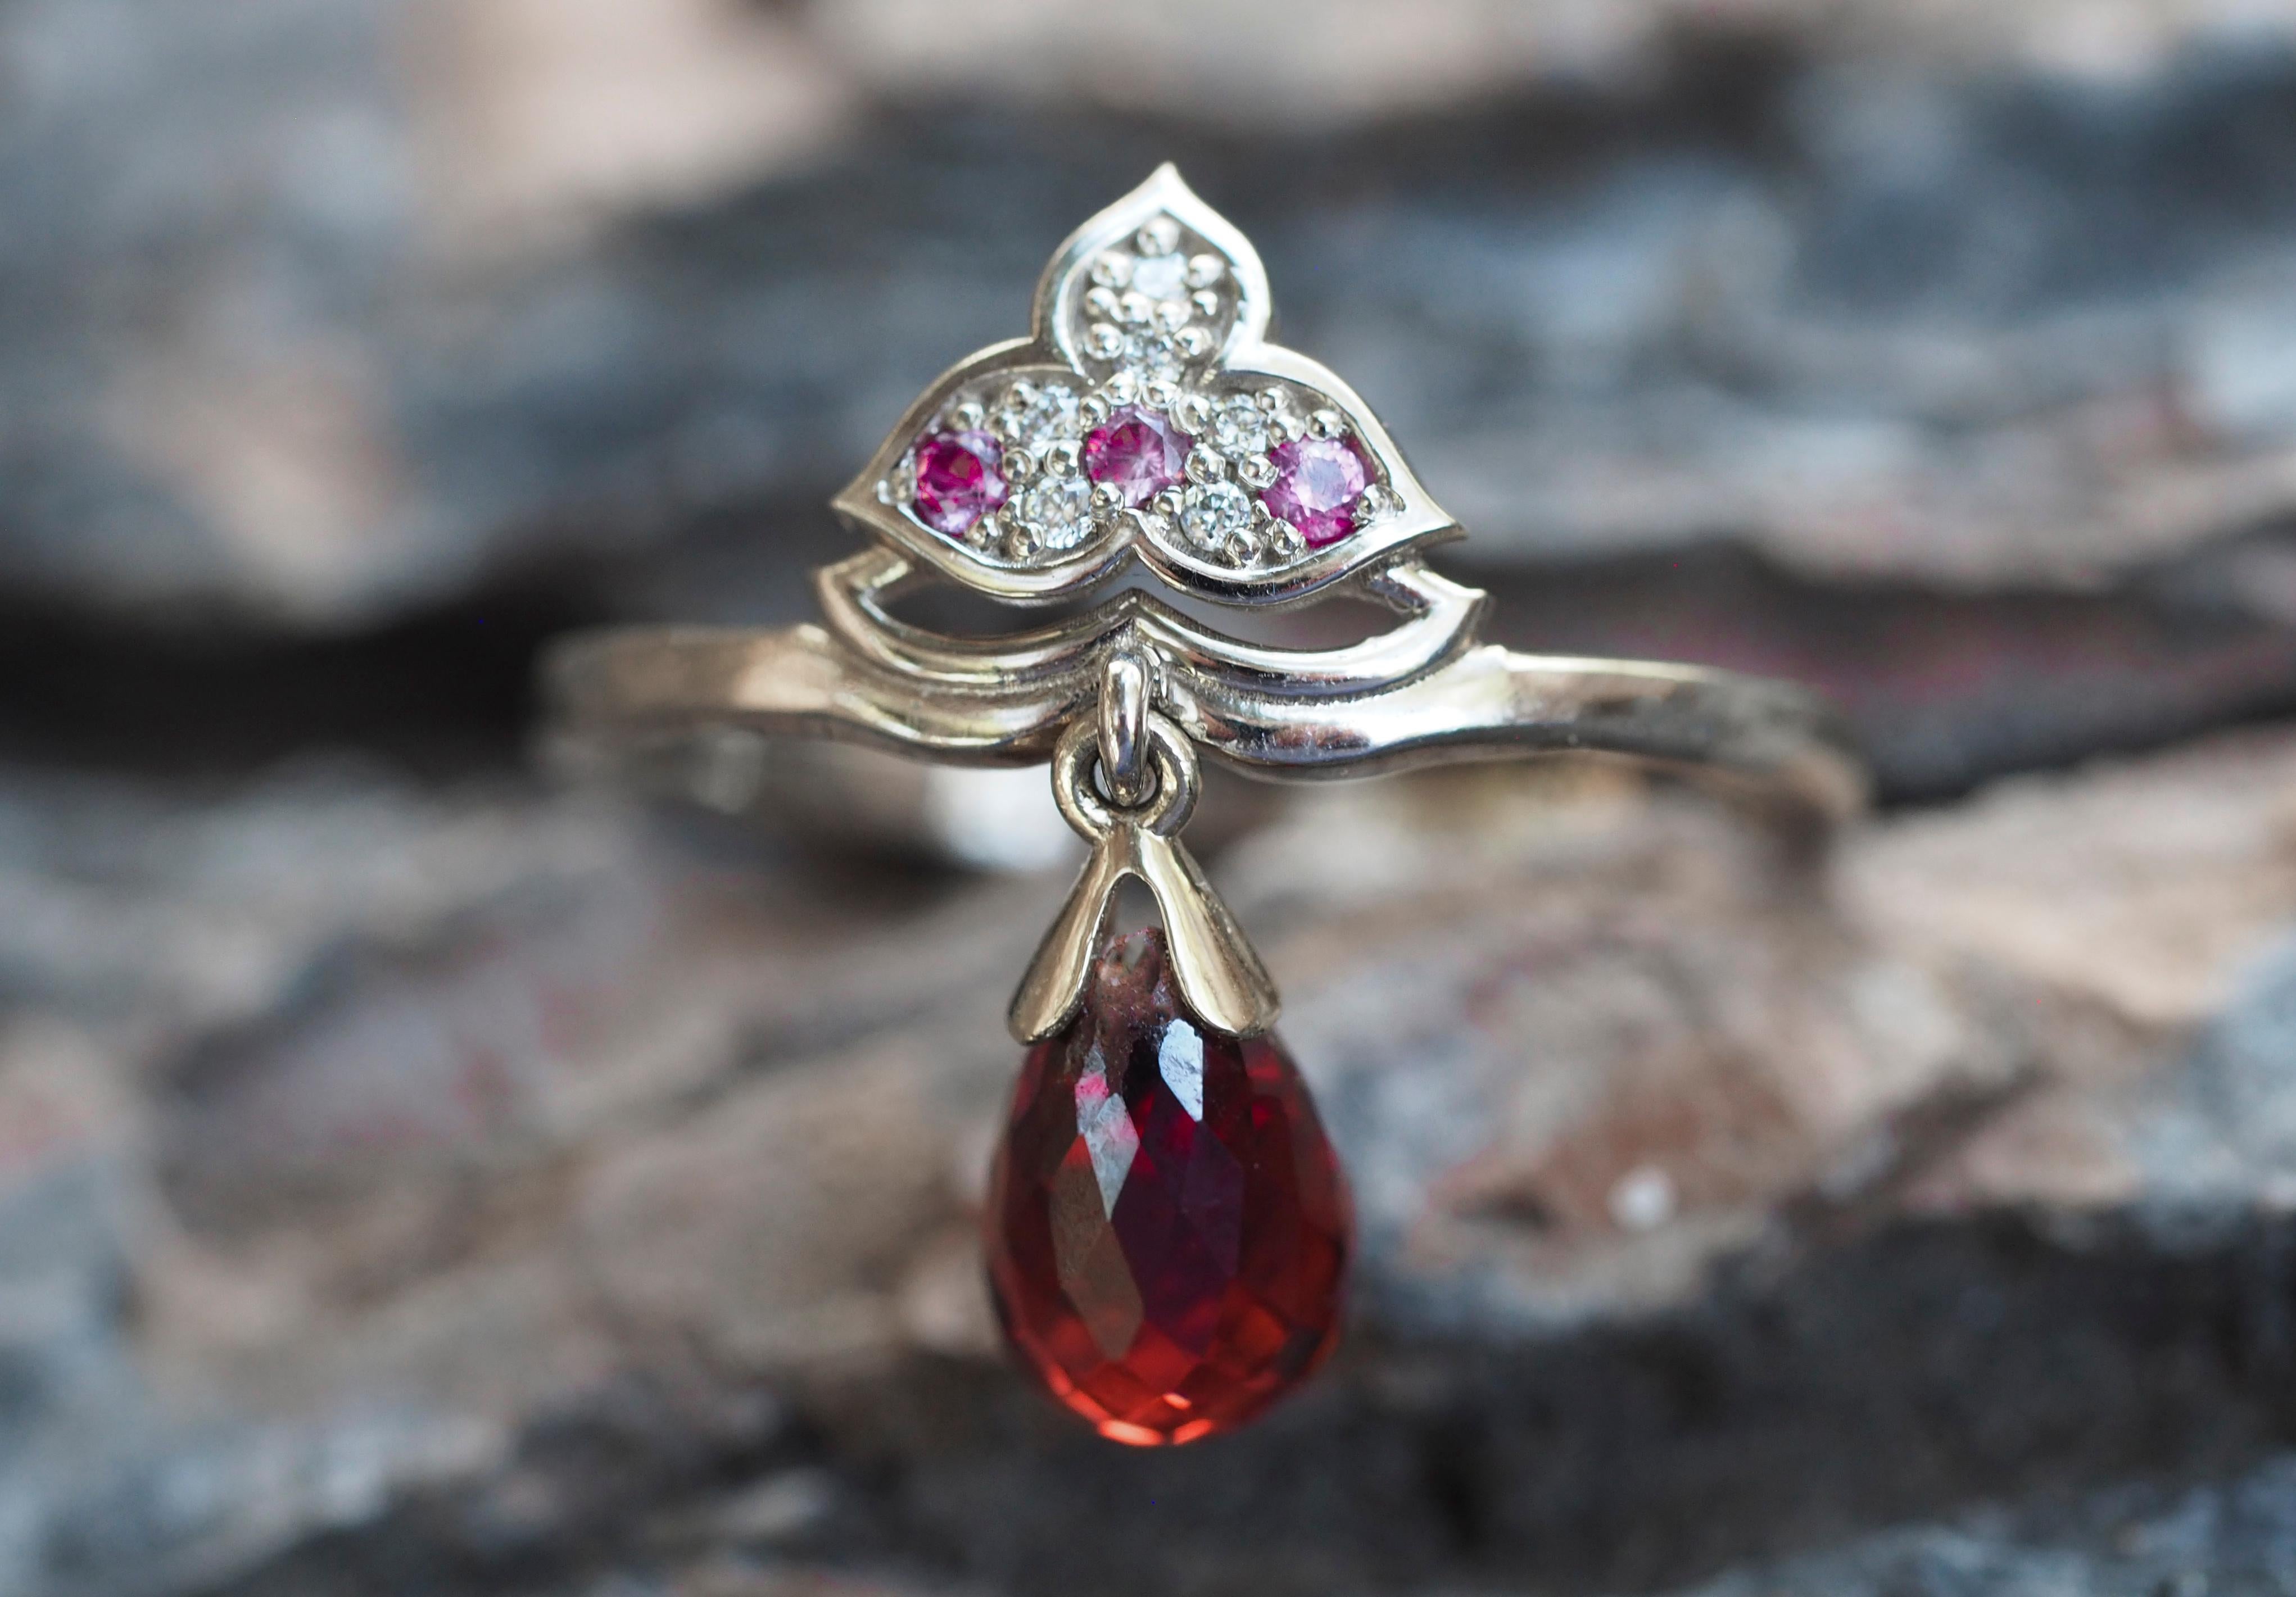 Lotus 14k gold ring with garnet. 
January birthstone ring. Gold Lotus Flower Ring. Garnet briolette gold ring. Teardrop garnet ring.

Metal: 14k gold
Weight 2.17 gr. depends from size.

Gemstones:
Garnet: briolette shape, red color, Si clarity, 1